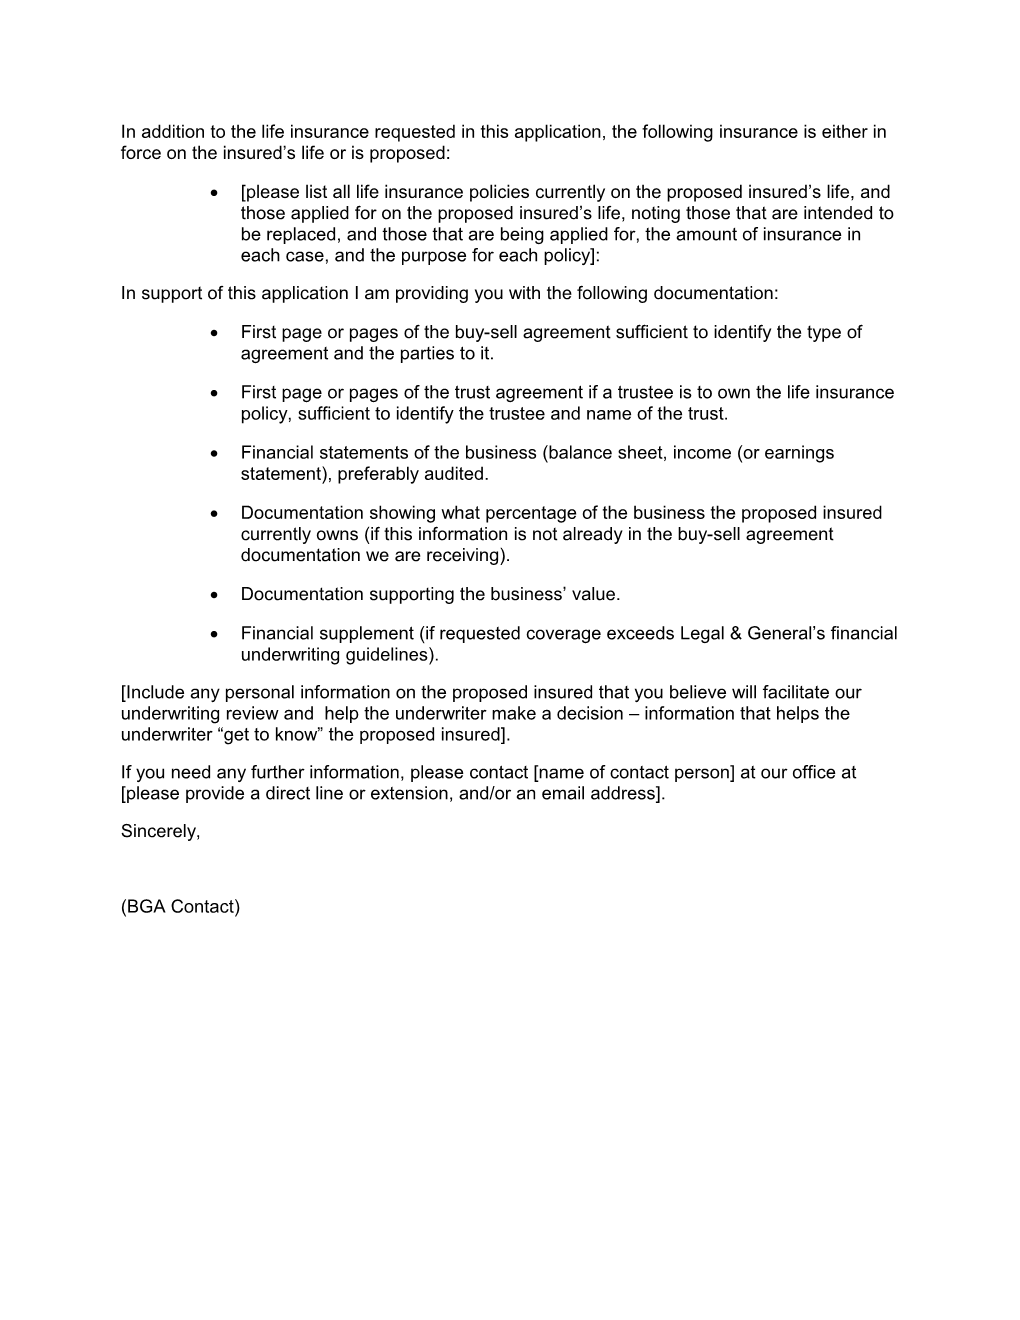 Cover Letter for Life Insurance Bought to Support a Buy-Sell Agreement